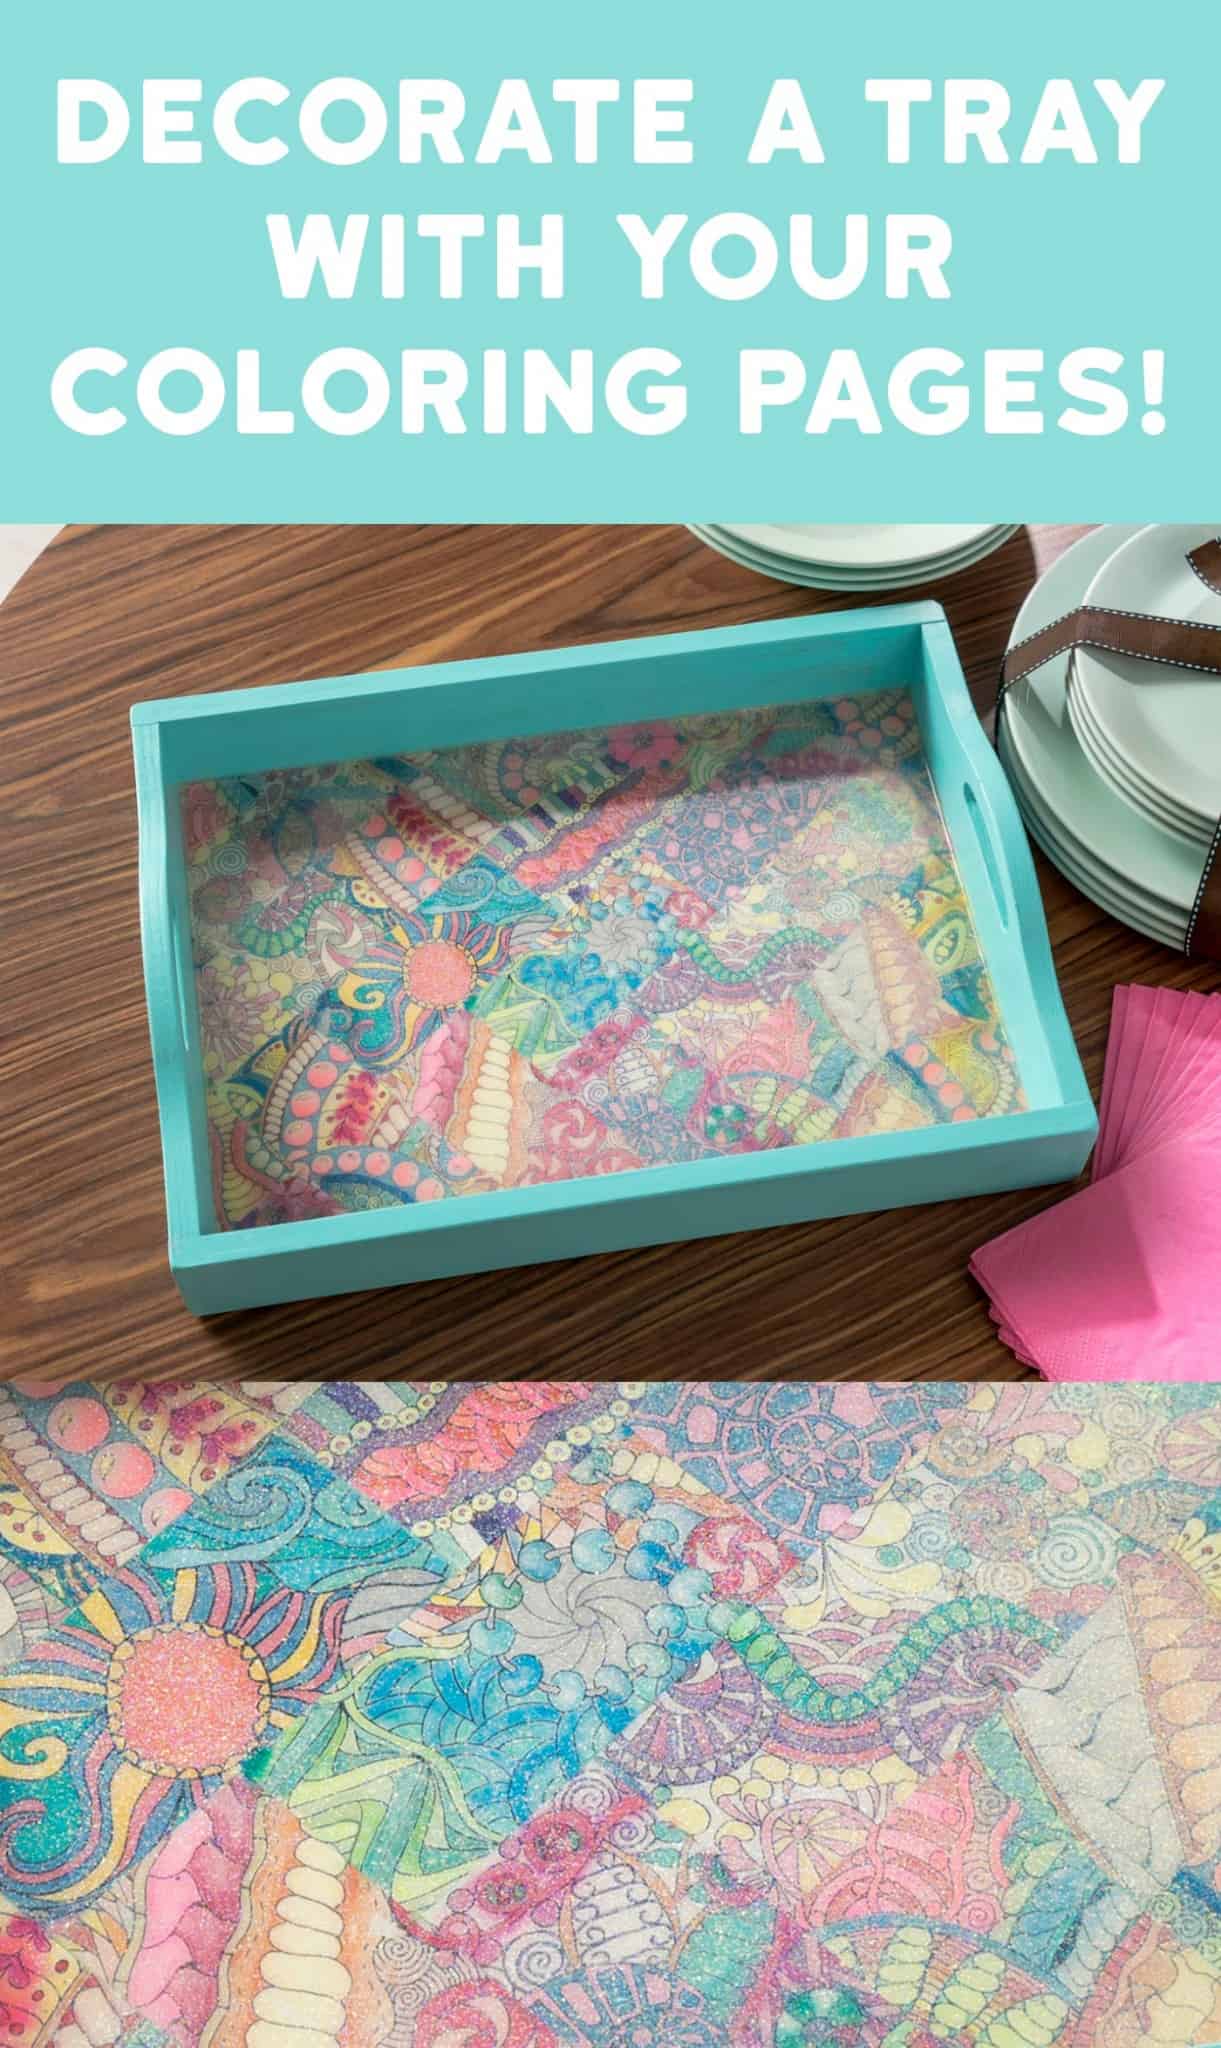 Do you have a bunch of adult coloring pages laying around and aren't sure what to do with them? Decorate a tray! It's easy and makes a great gift idea.